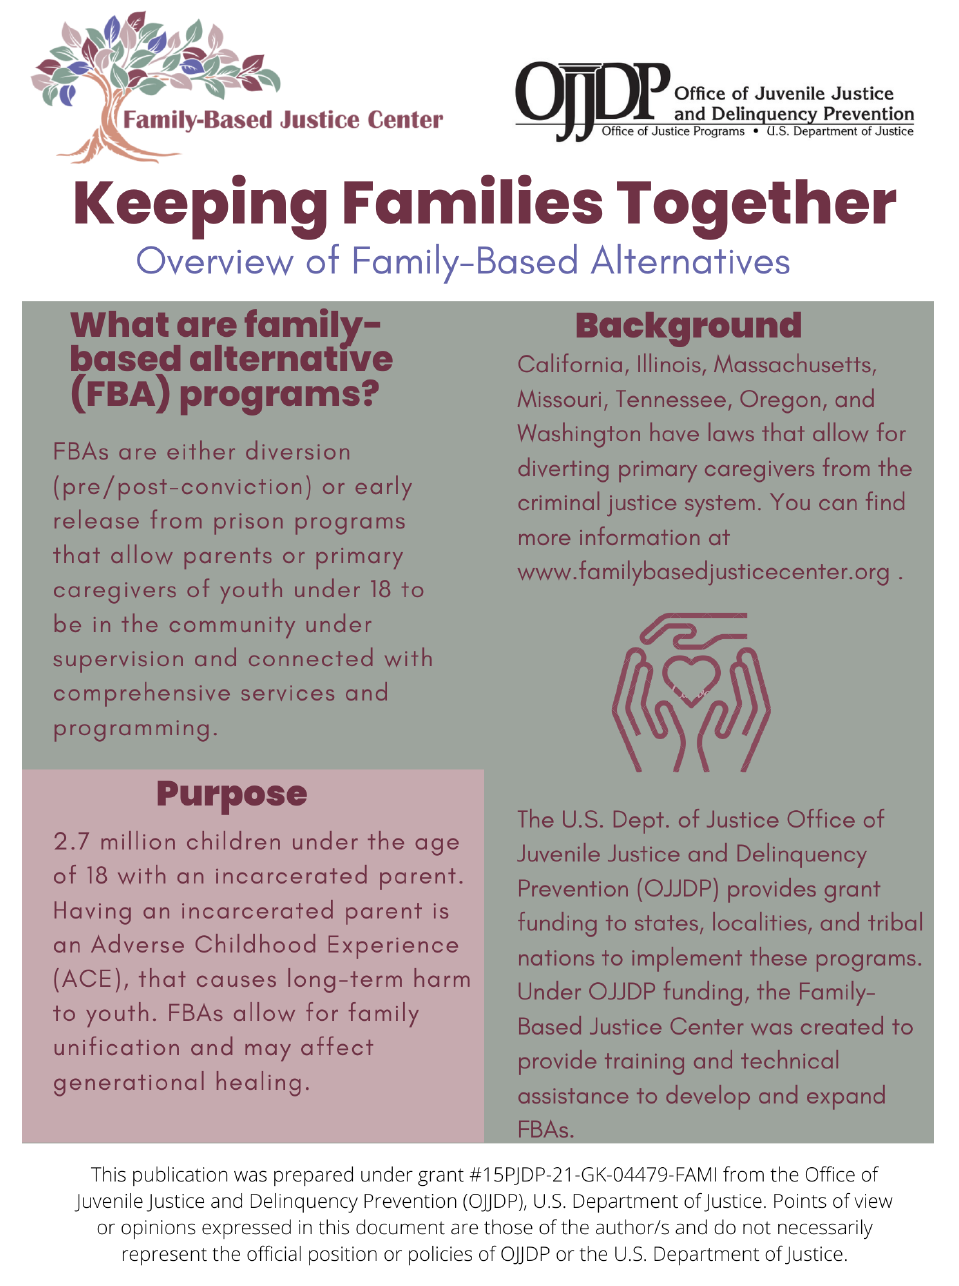 Keeping Families Together - Overview of Family-Based Alternatives PDF file